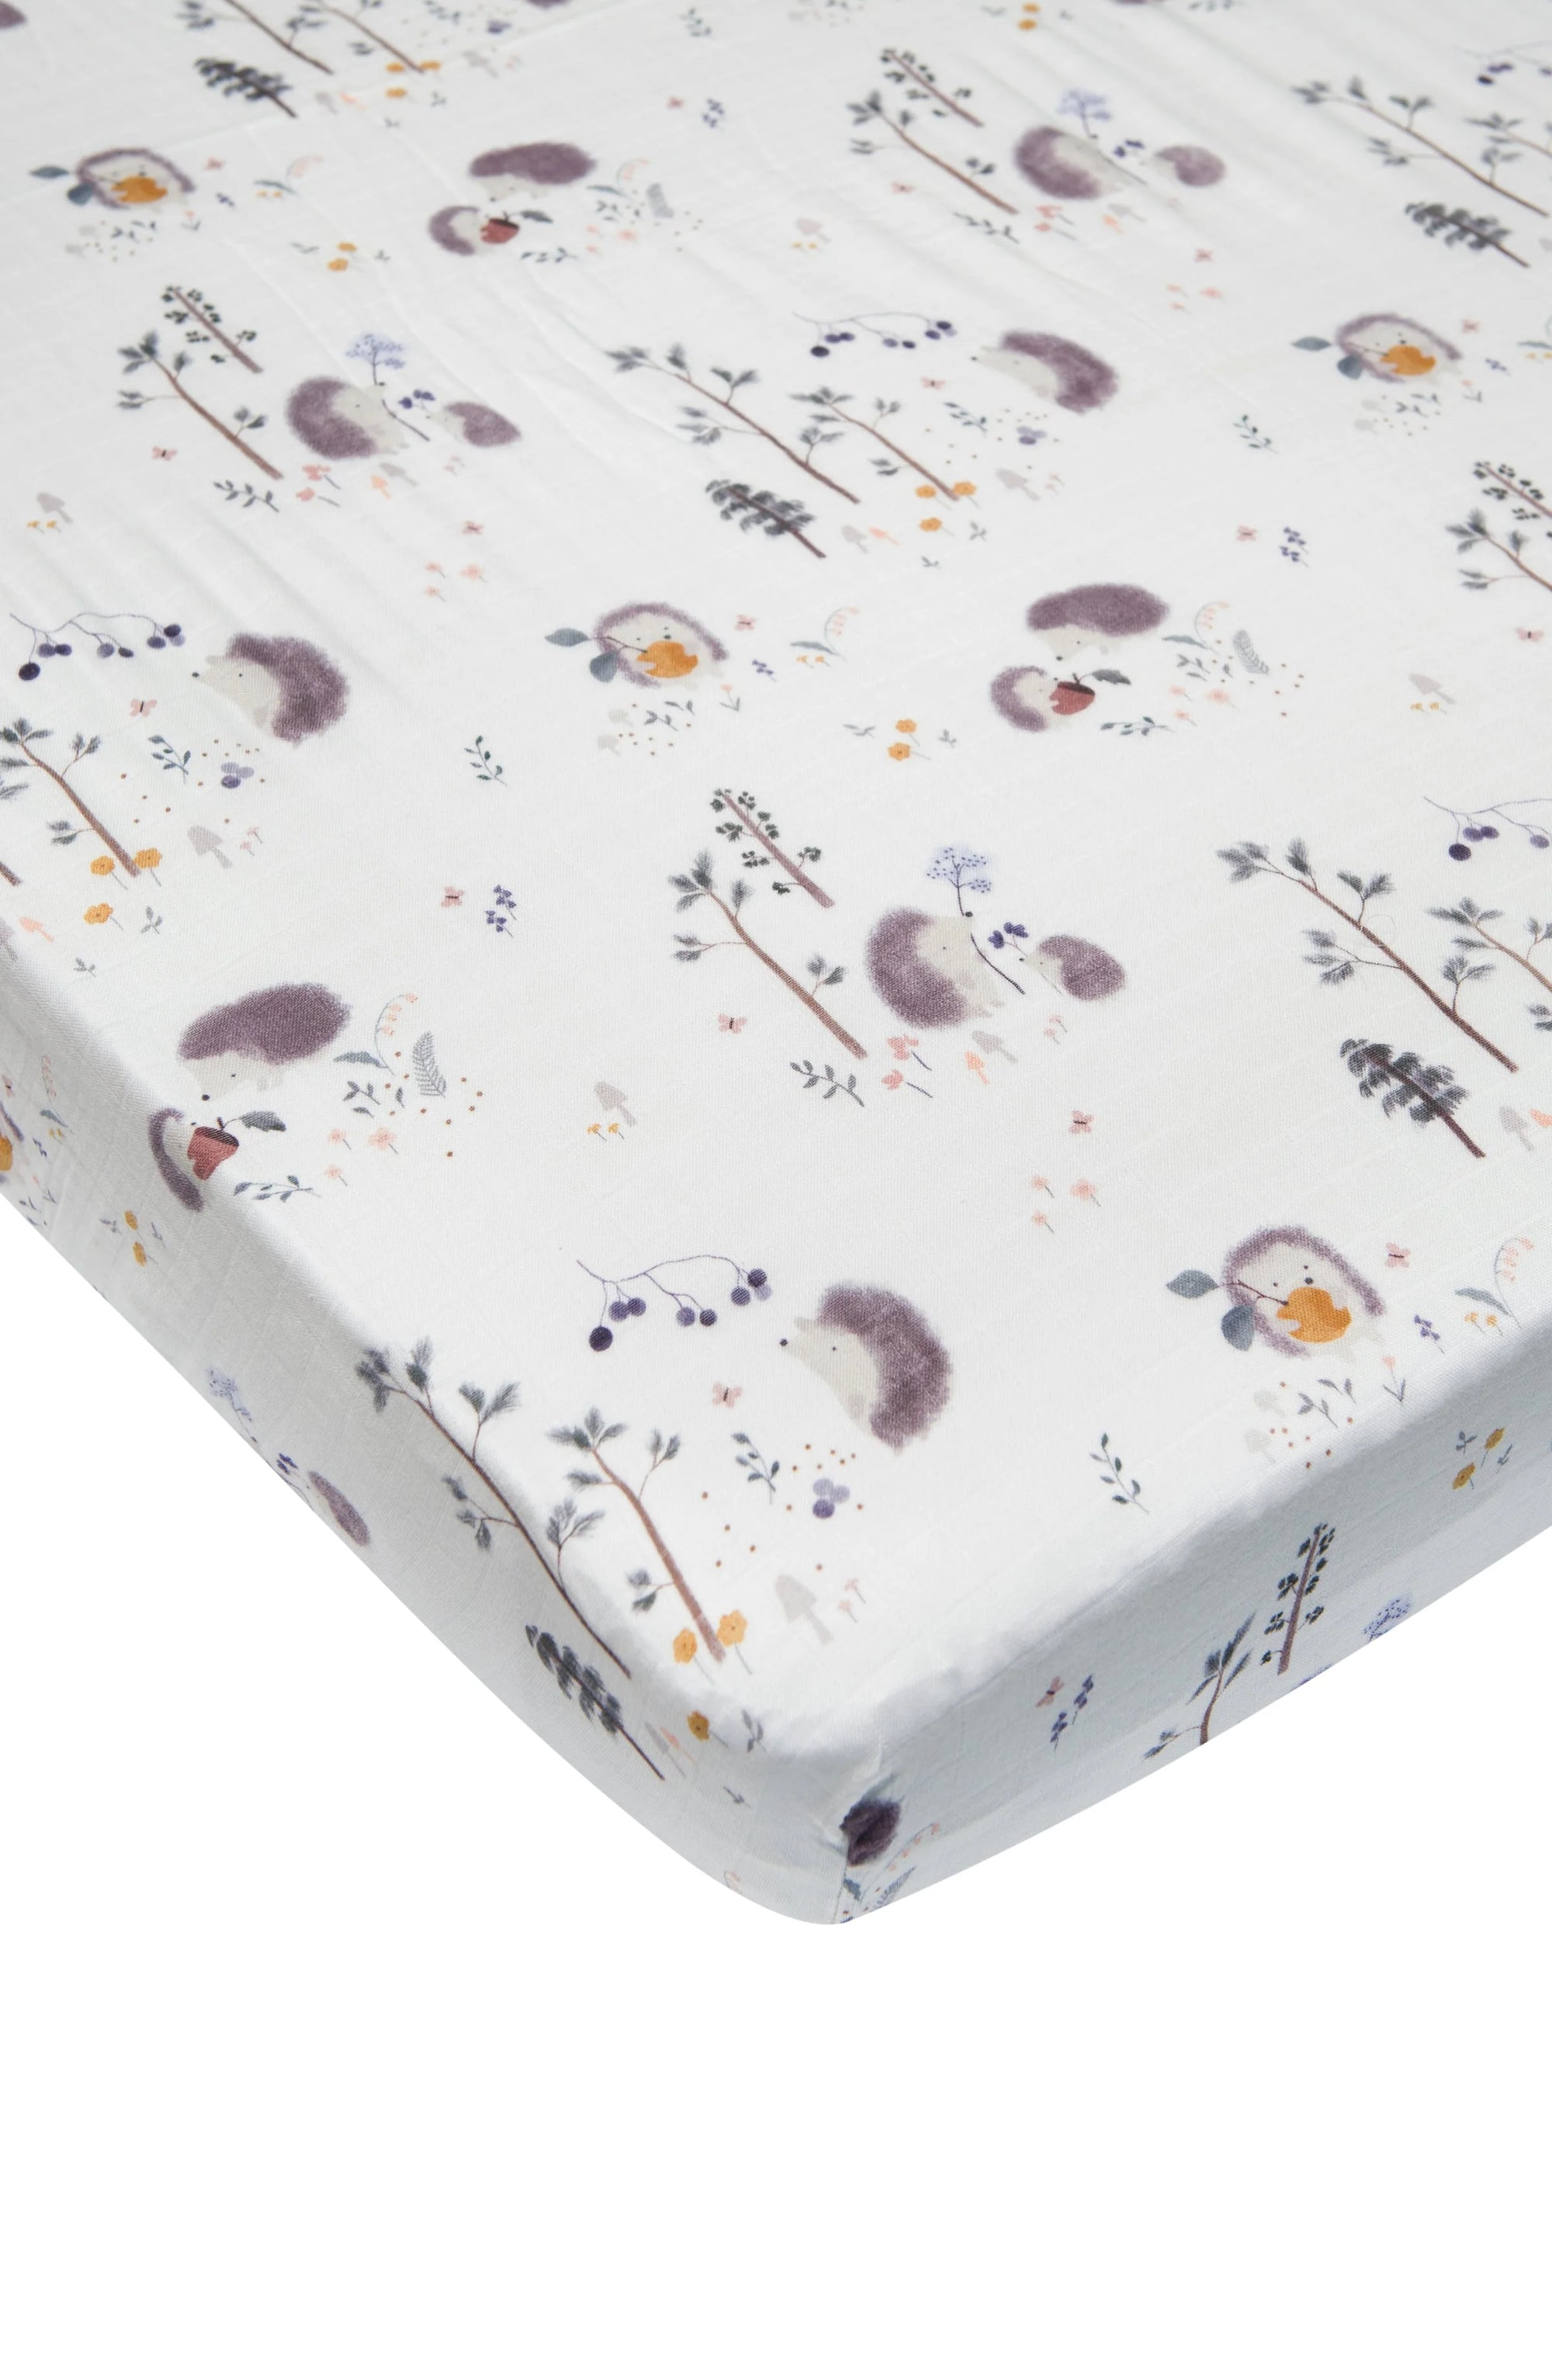 Loulou Lollipop Fitted Crib Sheet - Hedgehogs